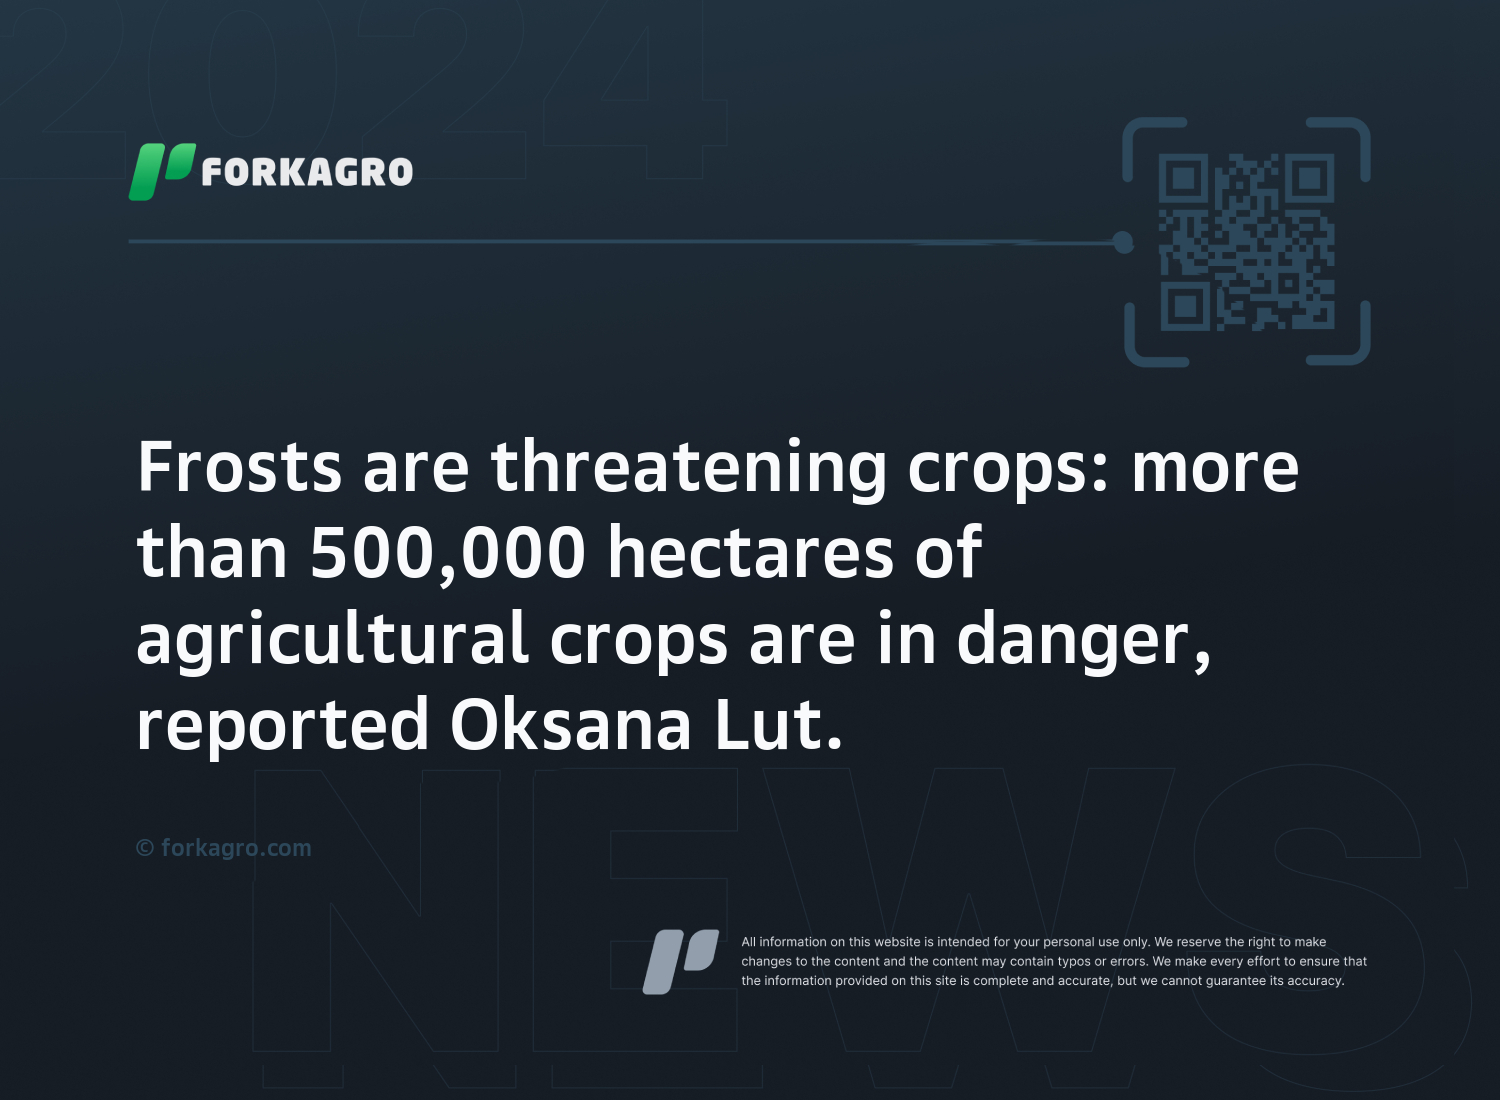 Frosts are threatening crops: more than 500,000 hectares of agricultural crops are in danger, reported Oksana Lut.